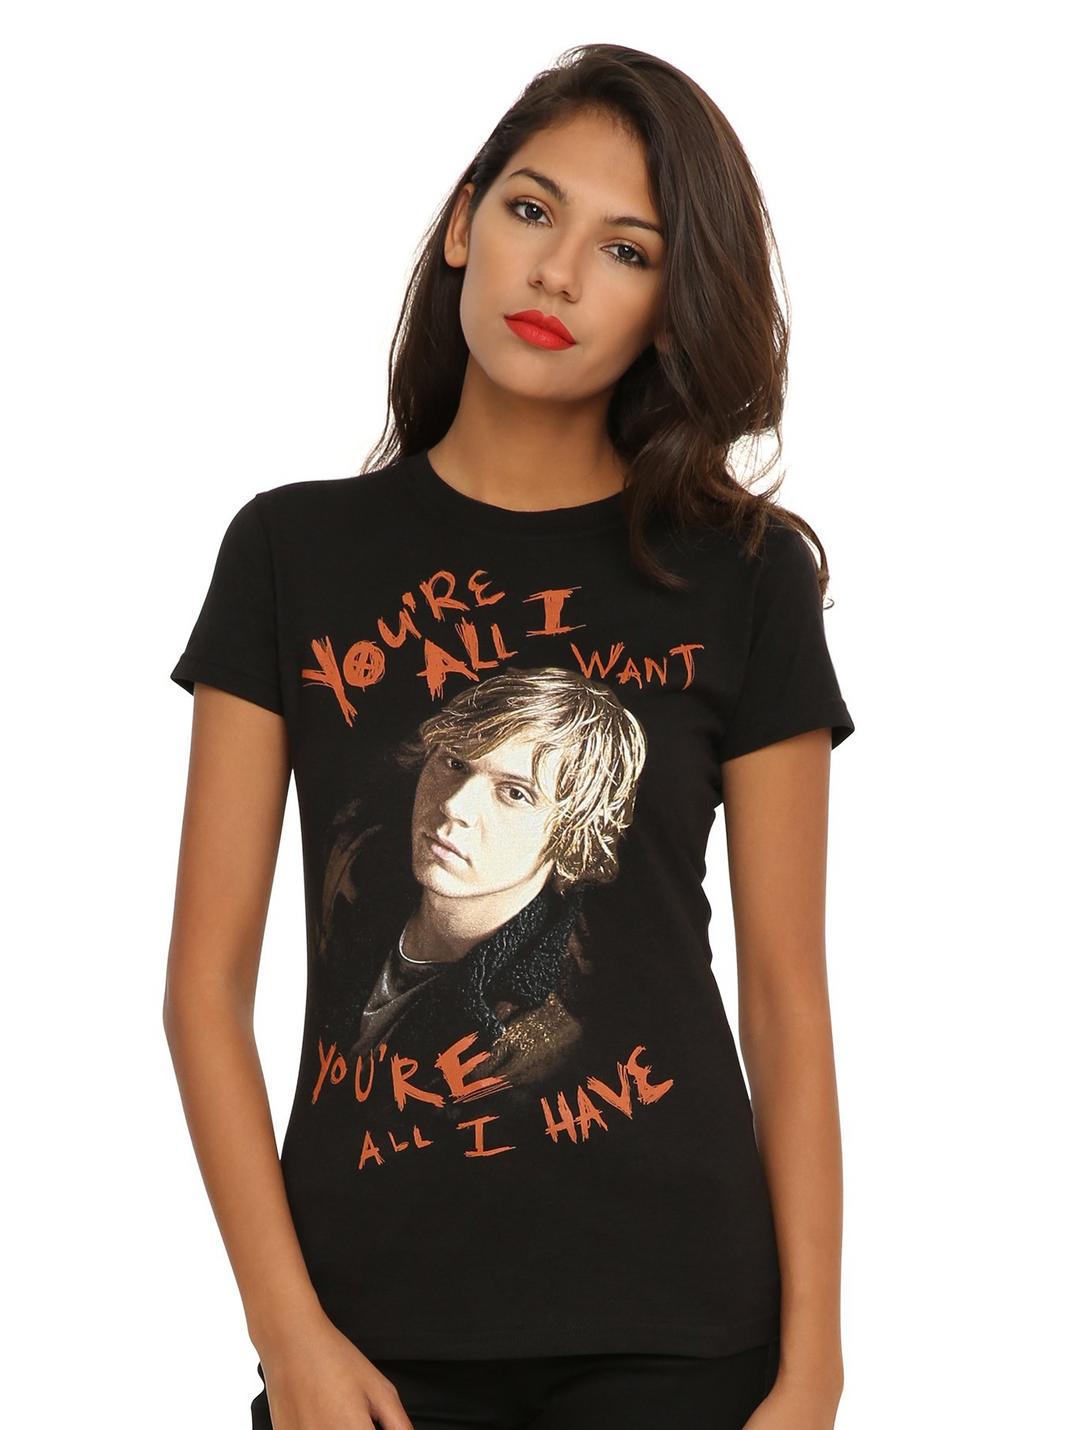 American Horror Story Tate You're All I Want Girls T-Shirt, BLACK, hi-res